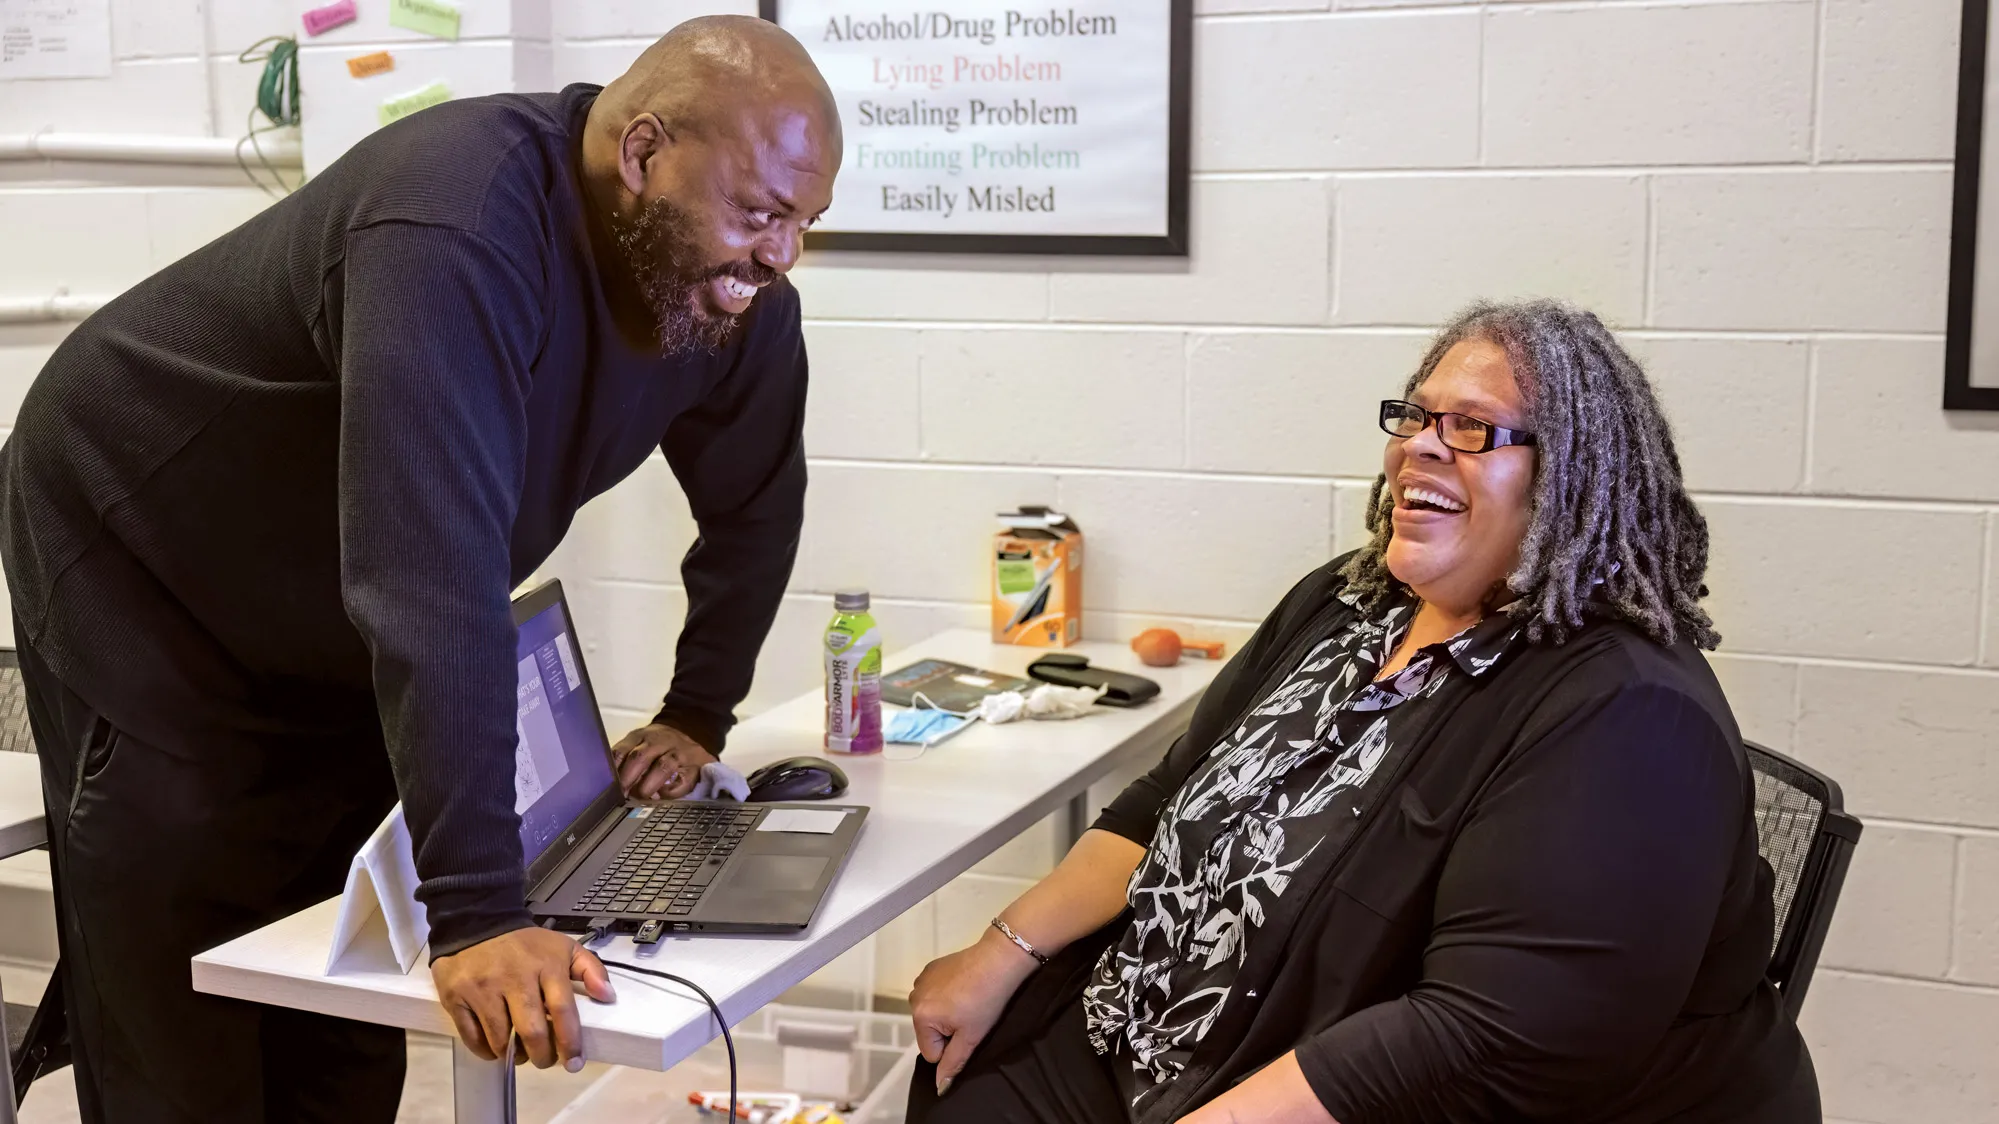 Patrice Palmer sits in a chair at a narrow table that holds her laptop and other things a teacher needs during class. She’s laughing as a man leans over the table and smiles as he watches her.